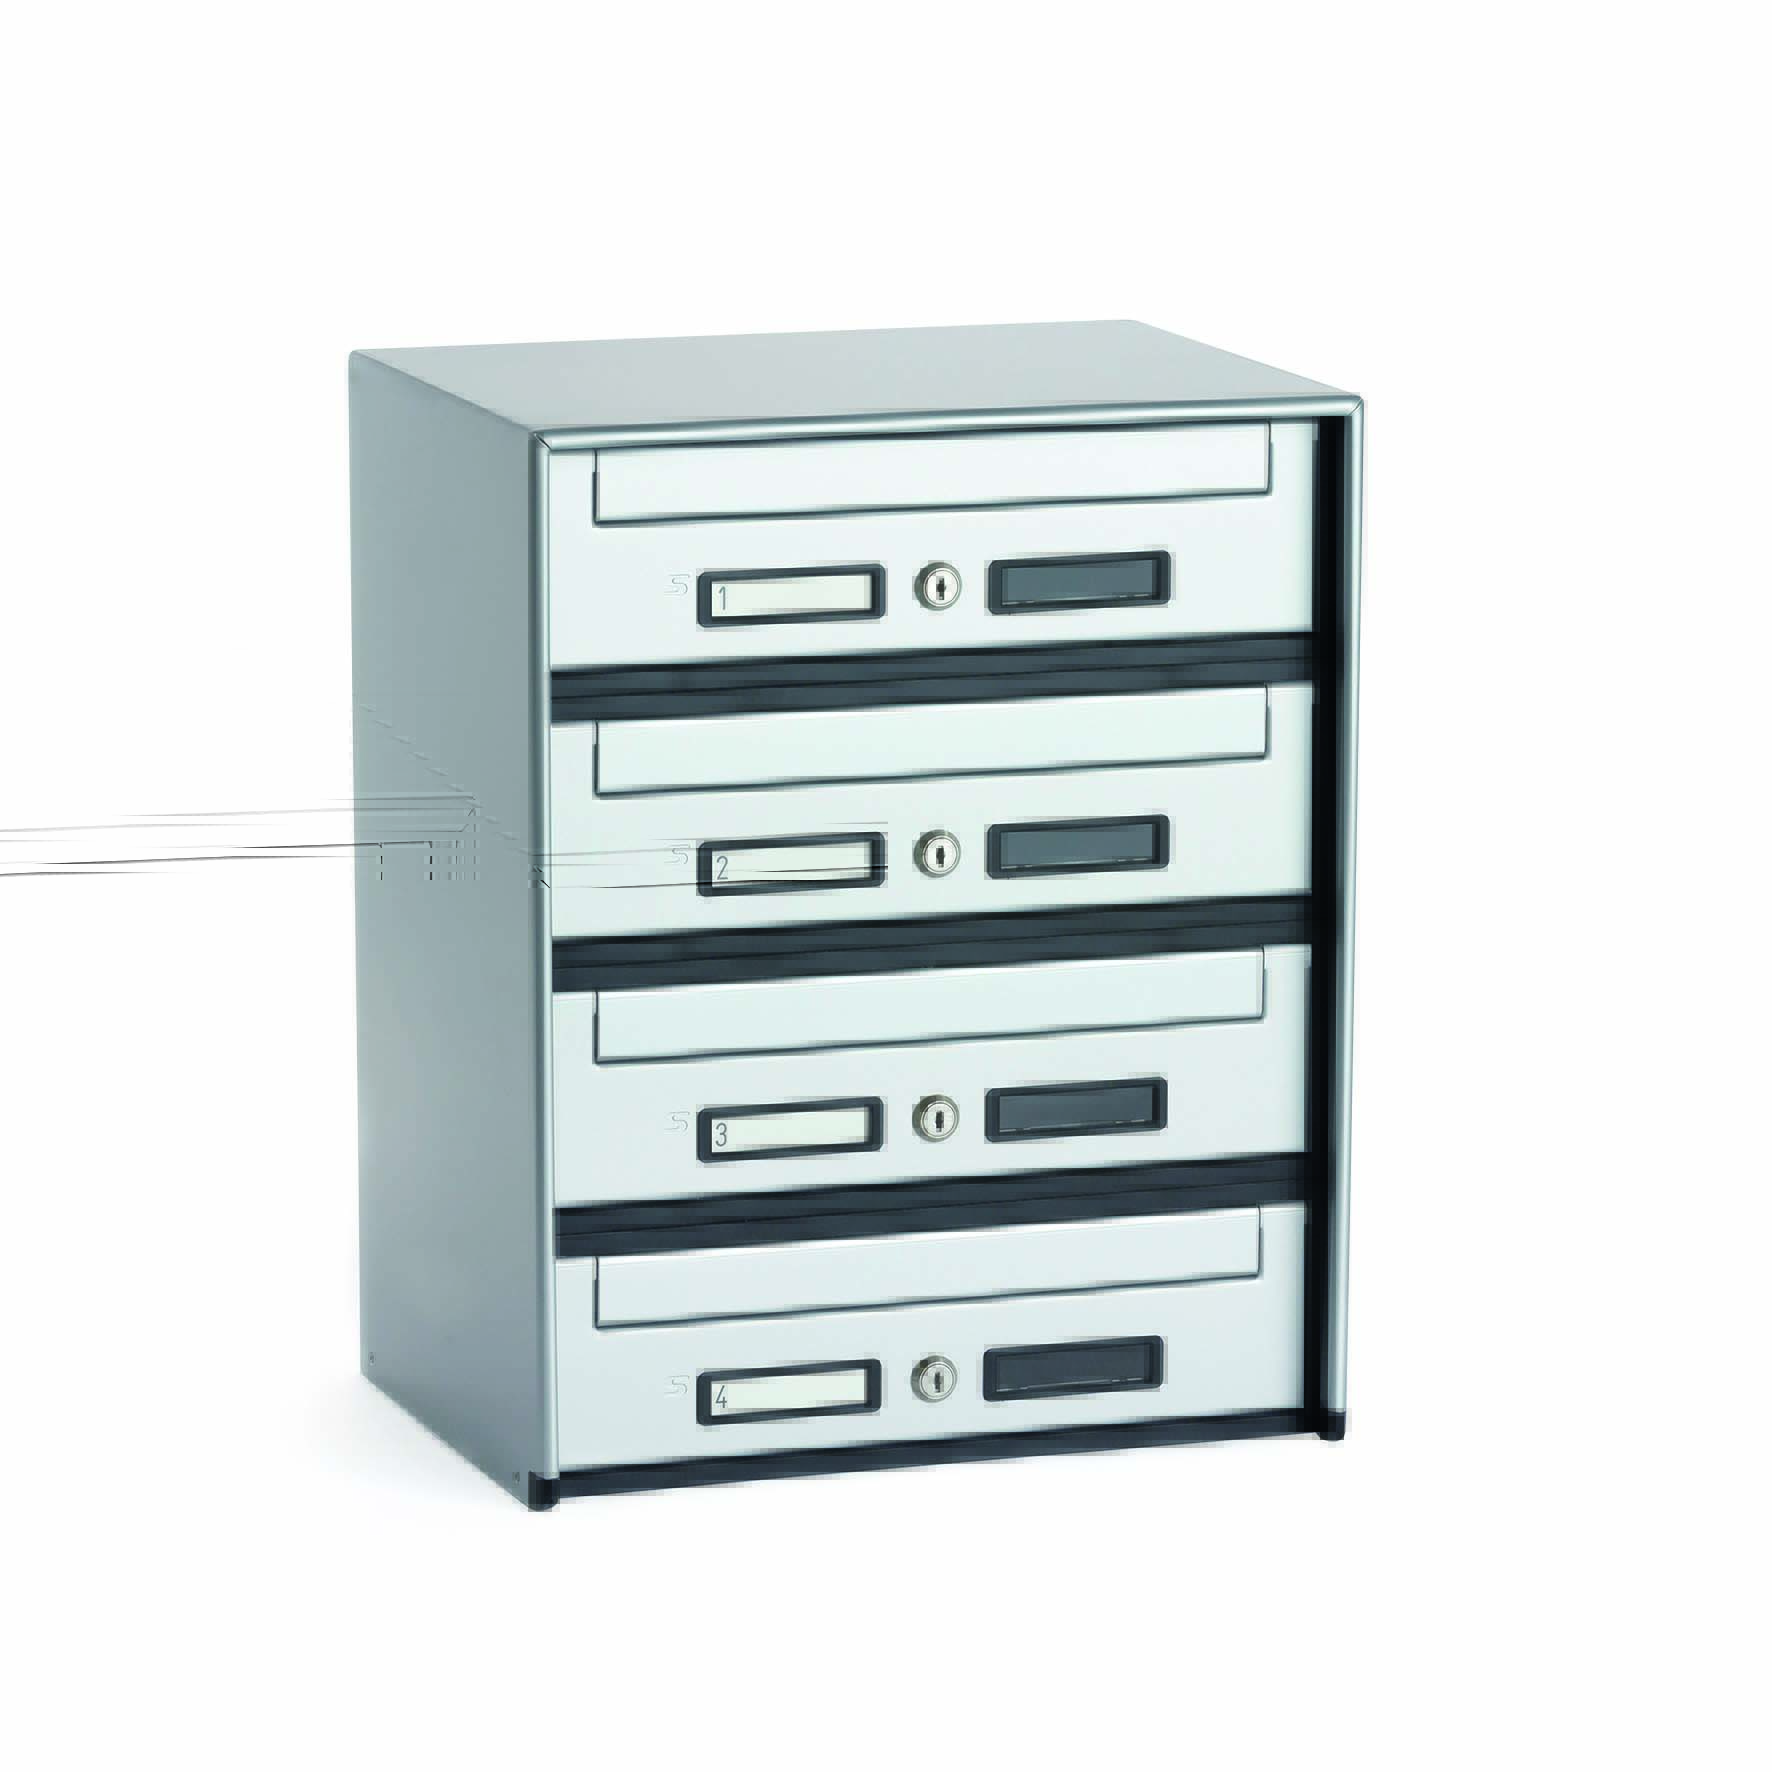 SC5 standard modular letterbox units with front mail collection - 4 mailboxes